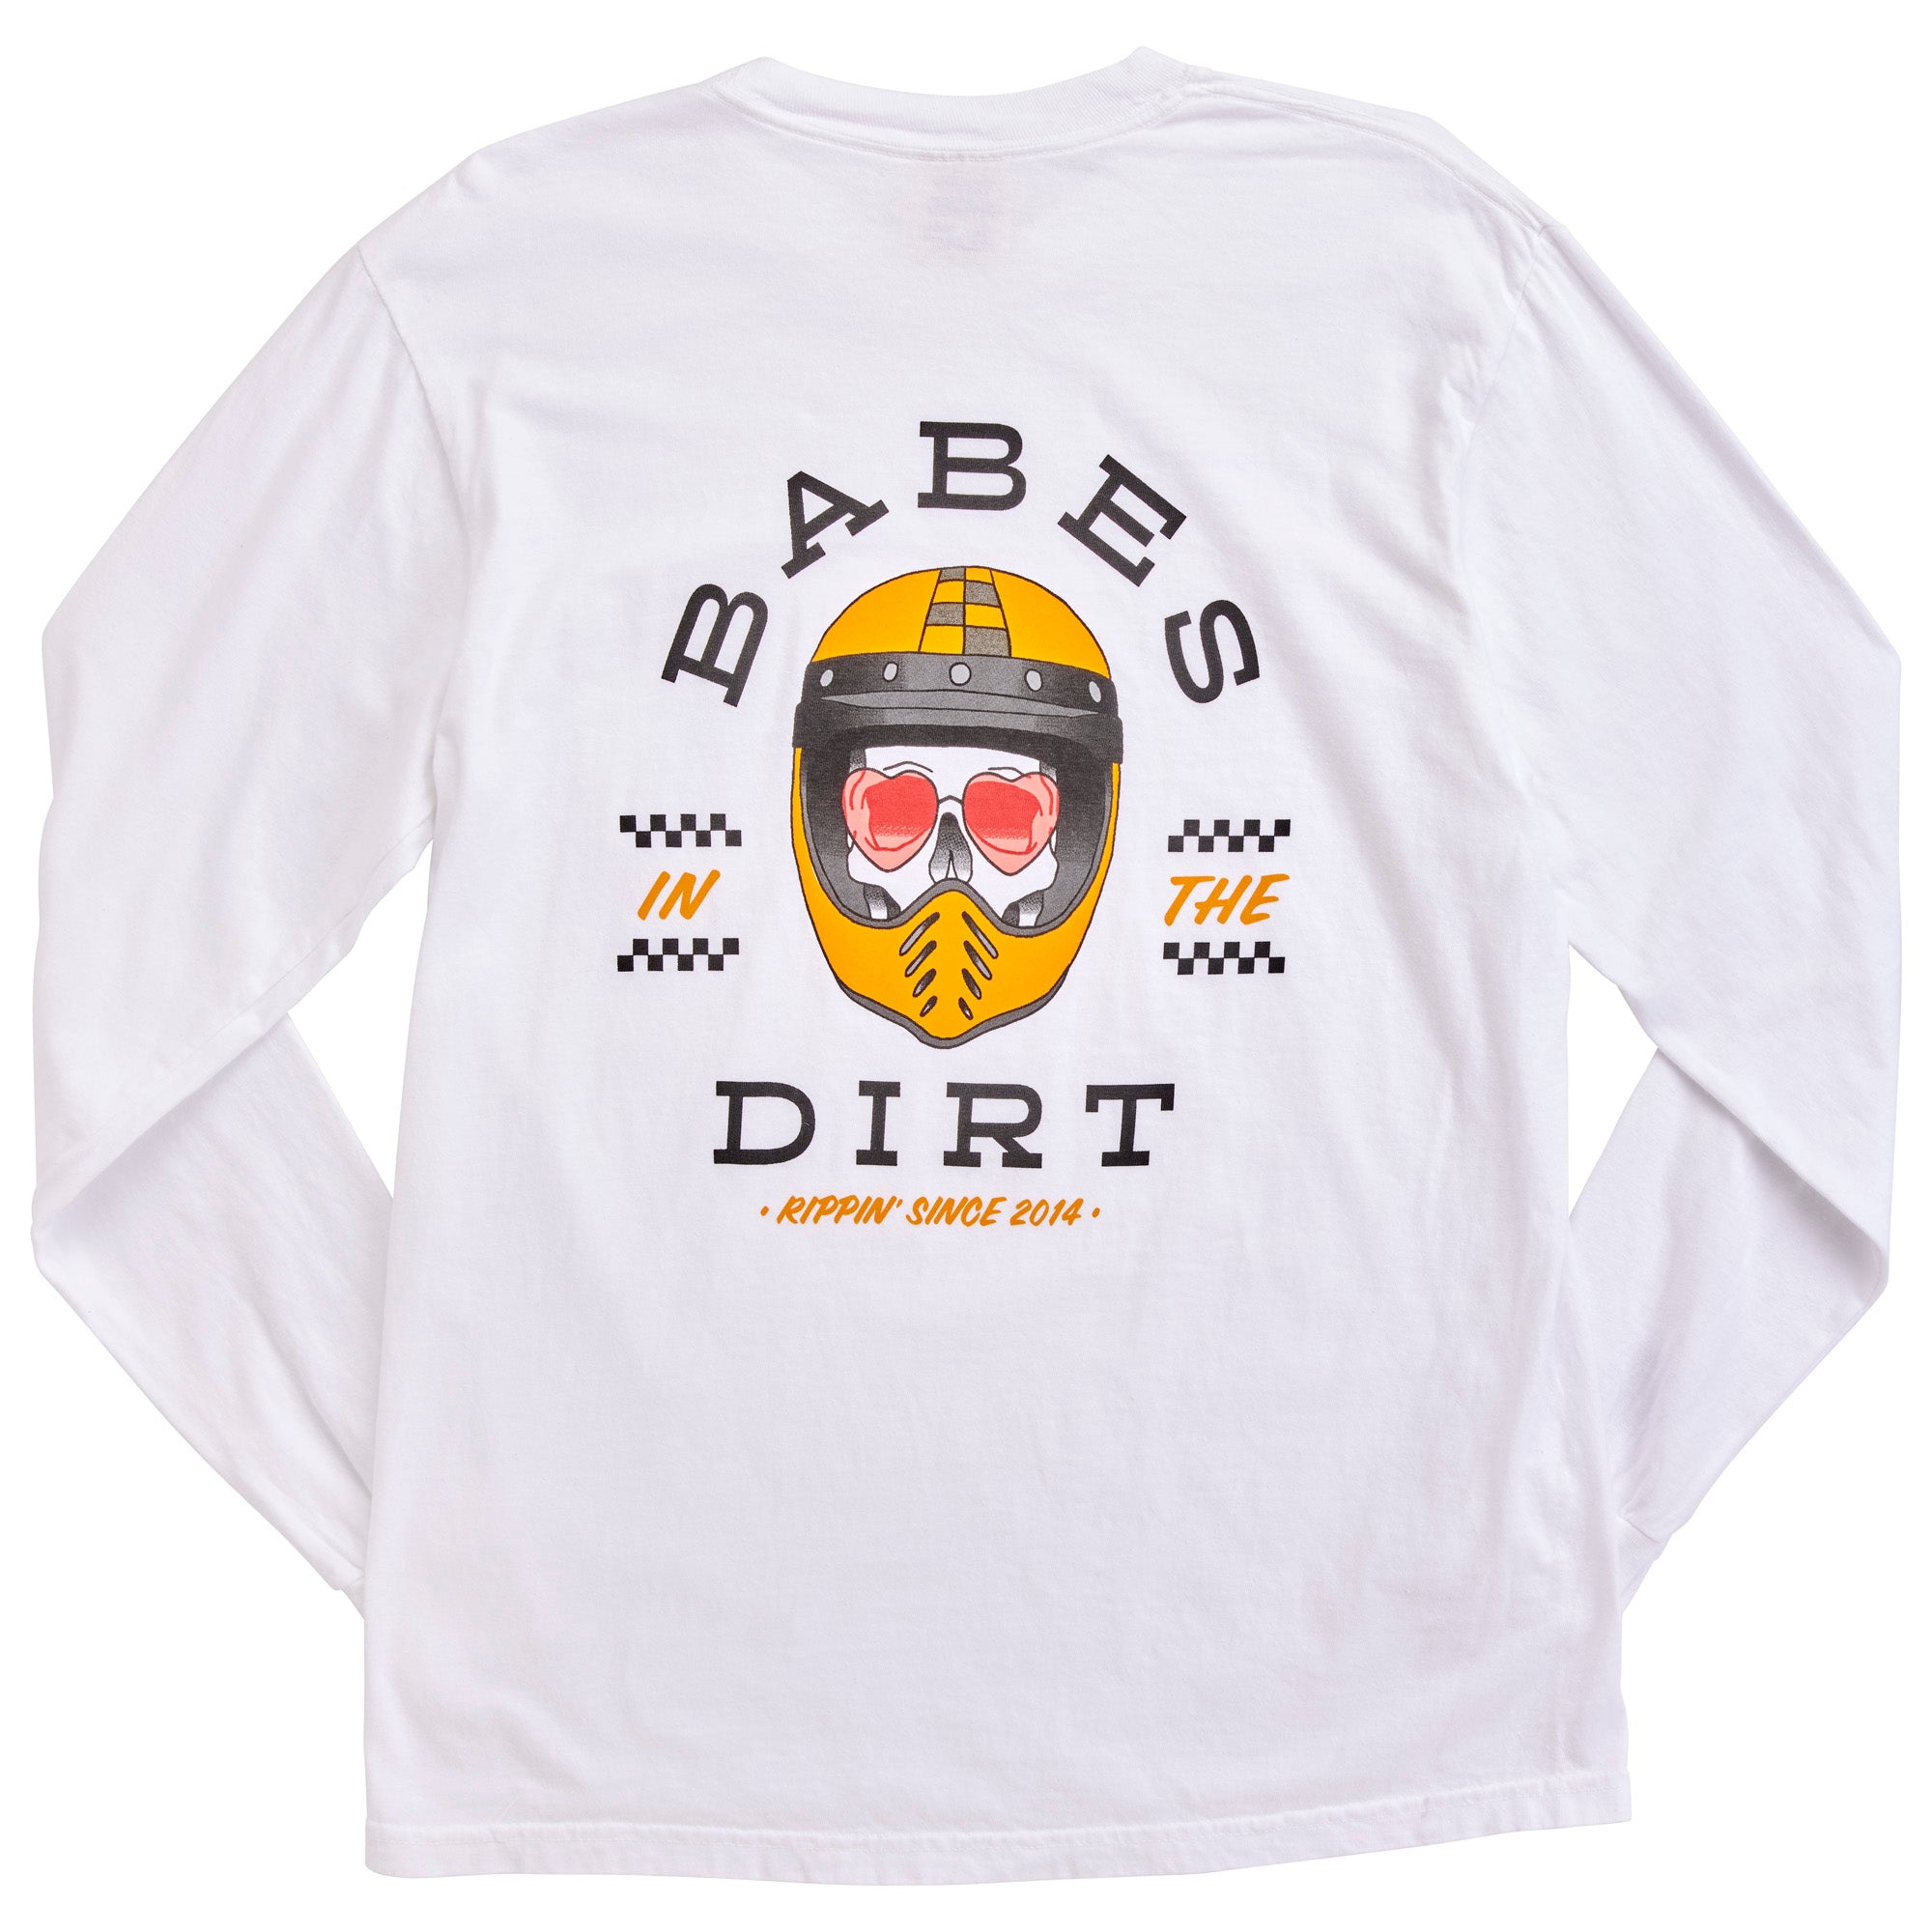 Ride Dirty L/S Tee - White